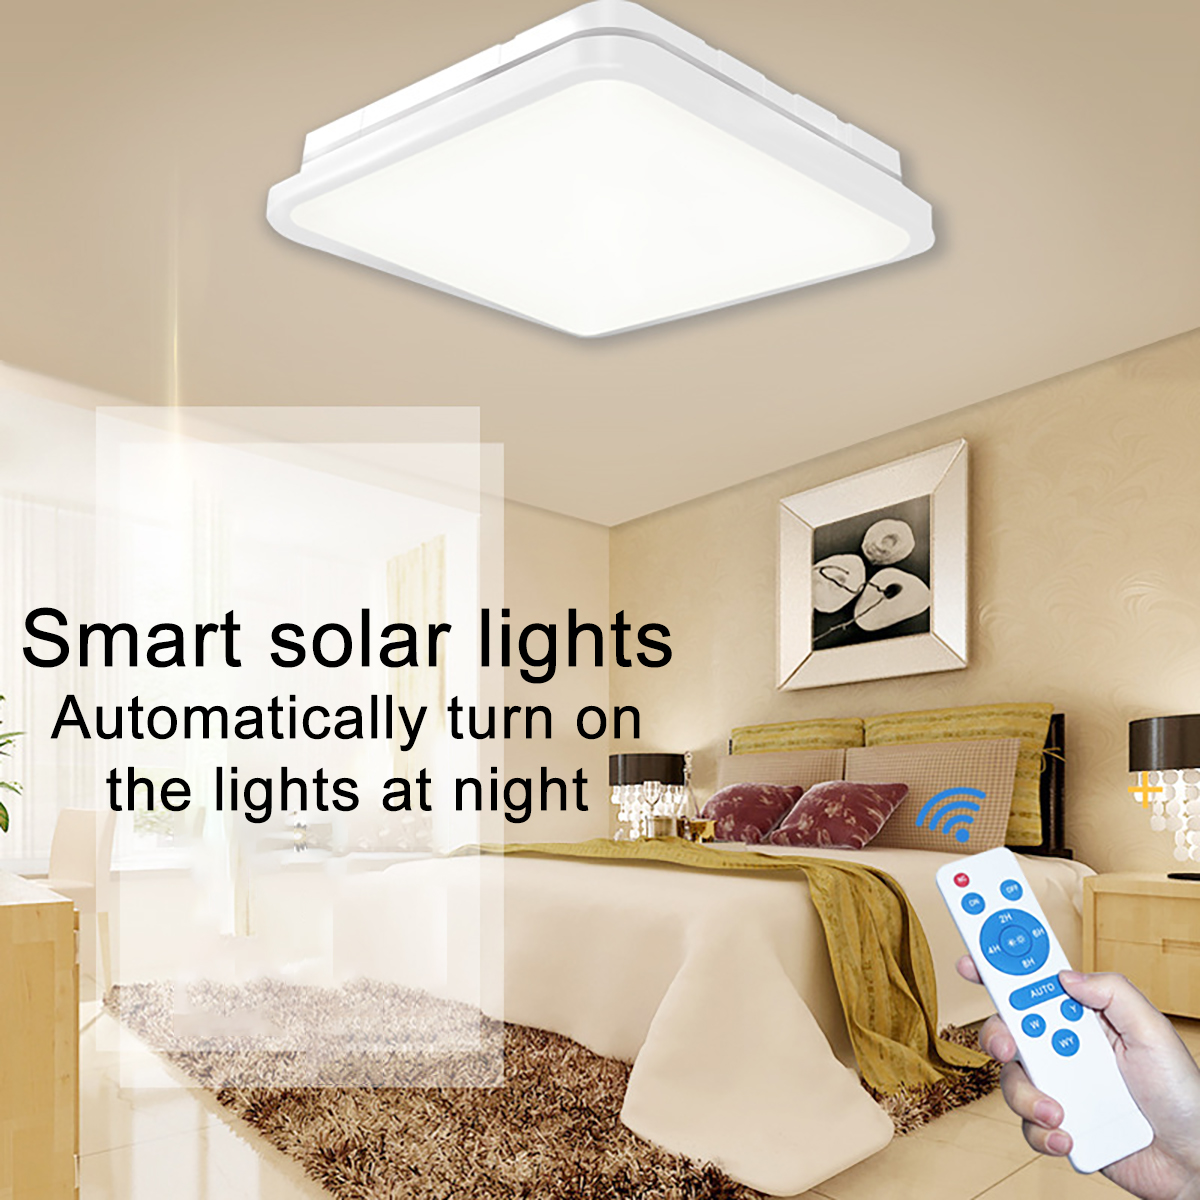 161PCS-50W-Camping-Tent-Light-Solar-Panels-3-Modes-Adjustable-Ceiling-Light-Indoor-Bedroom-Lamp-with-1847643-3